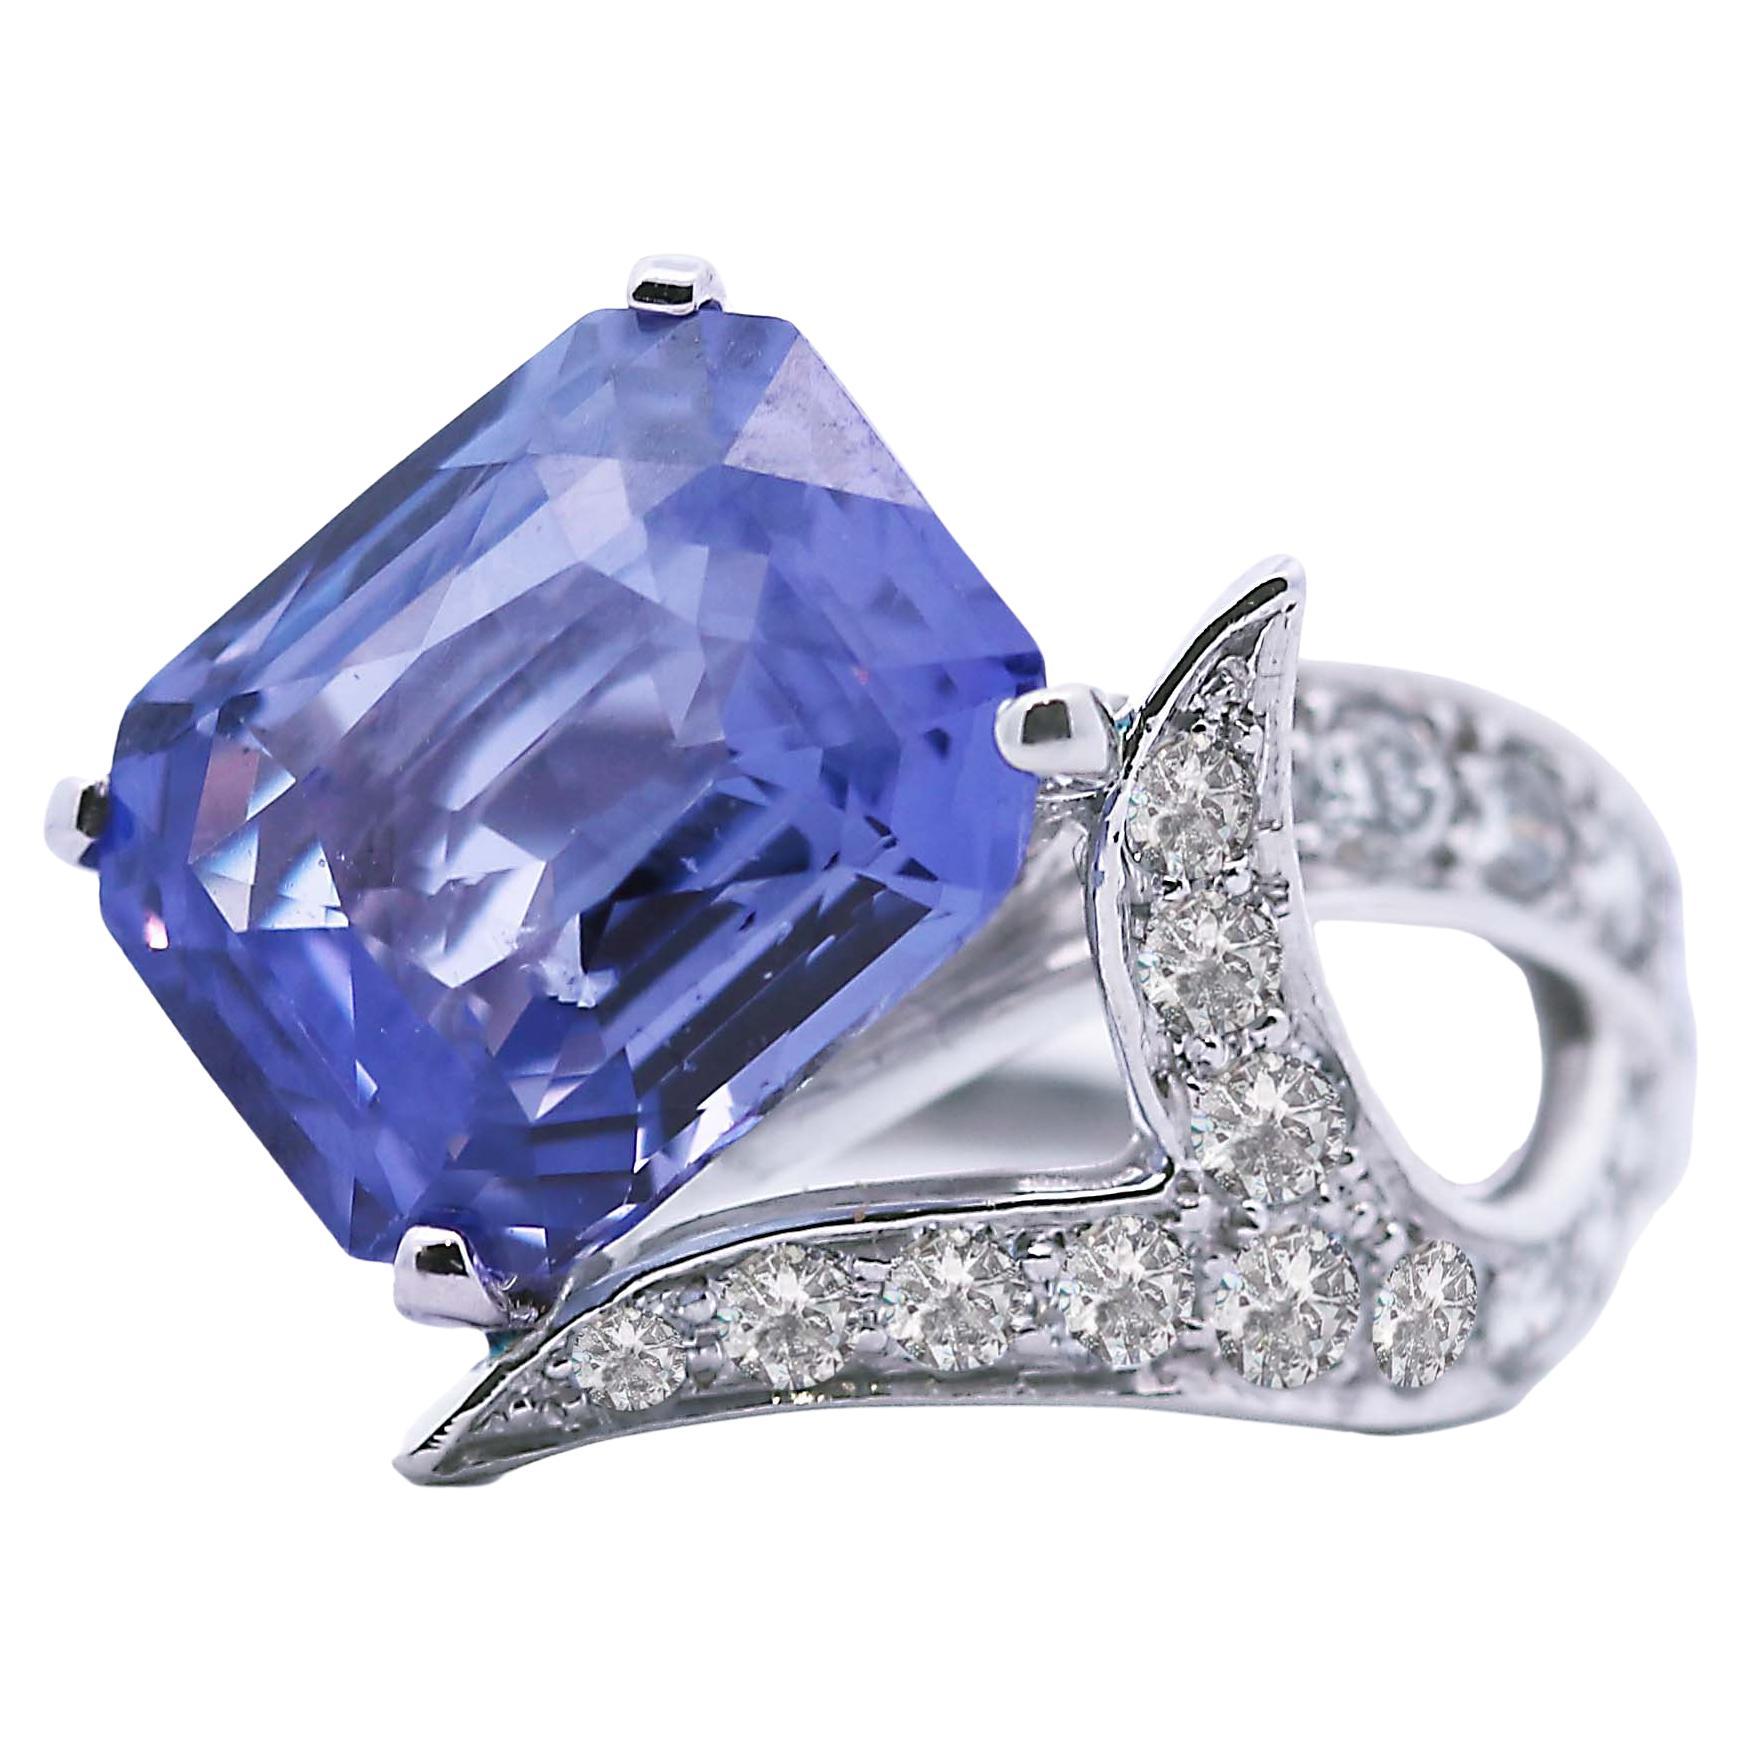 GIA Certified 6.19 Carat Color Change Sapphire Cocktail Ring For Sale